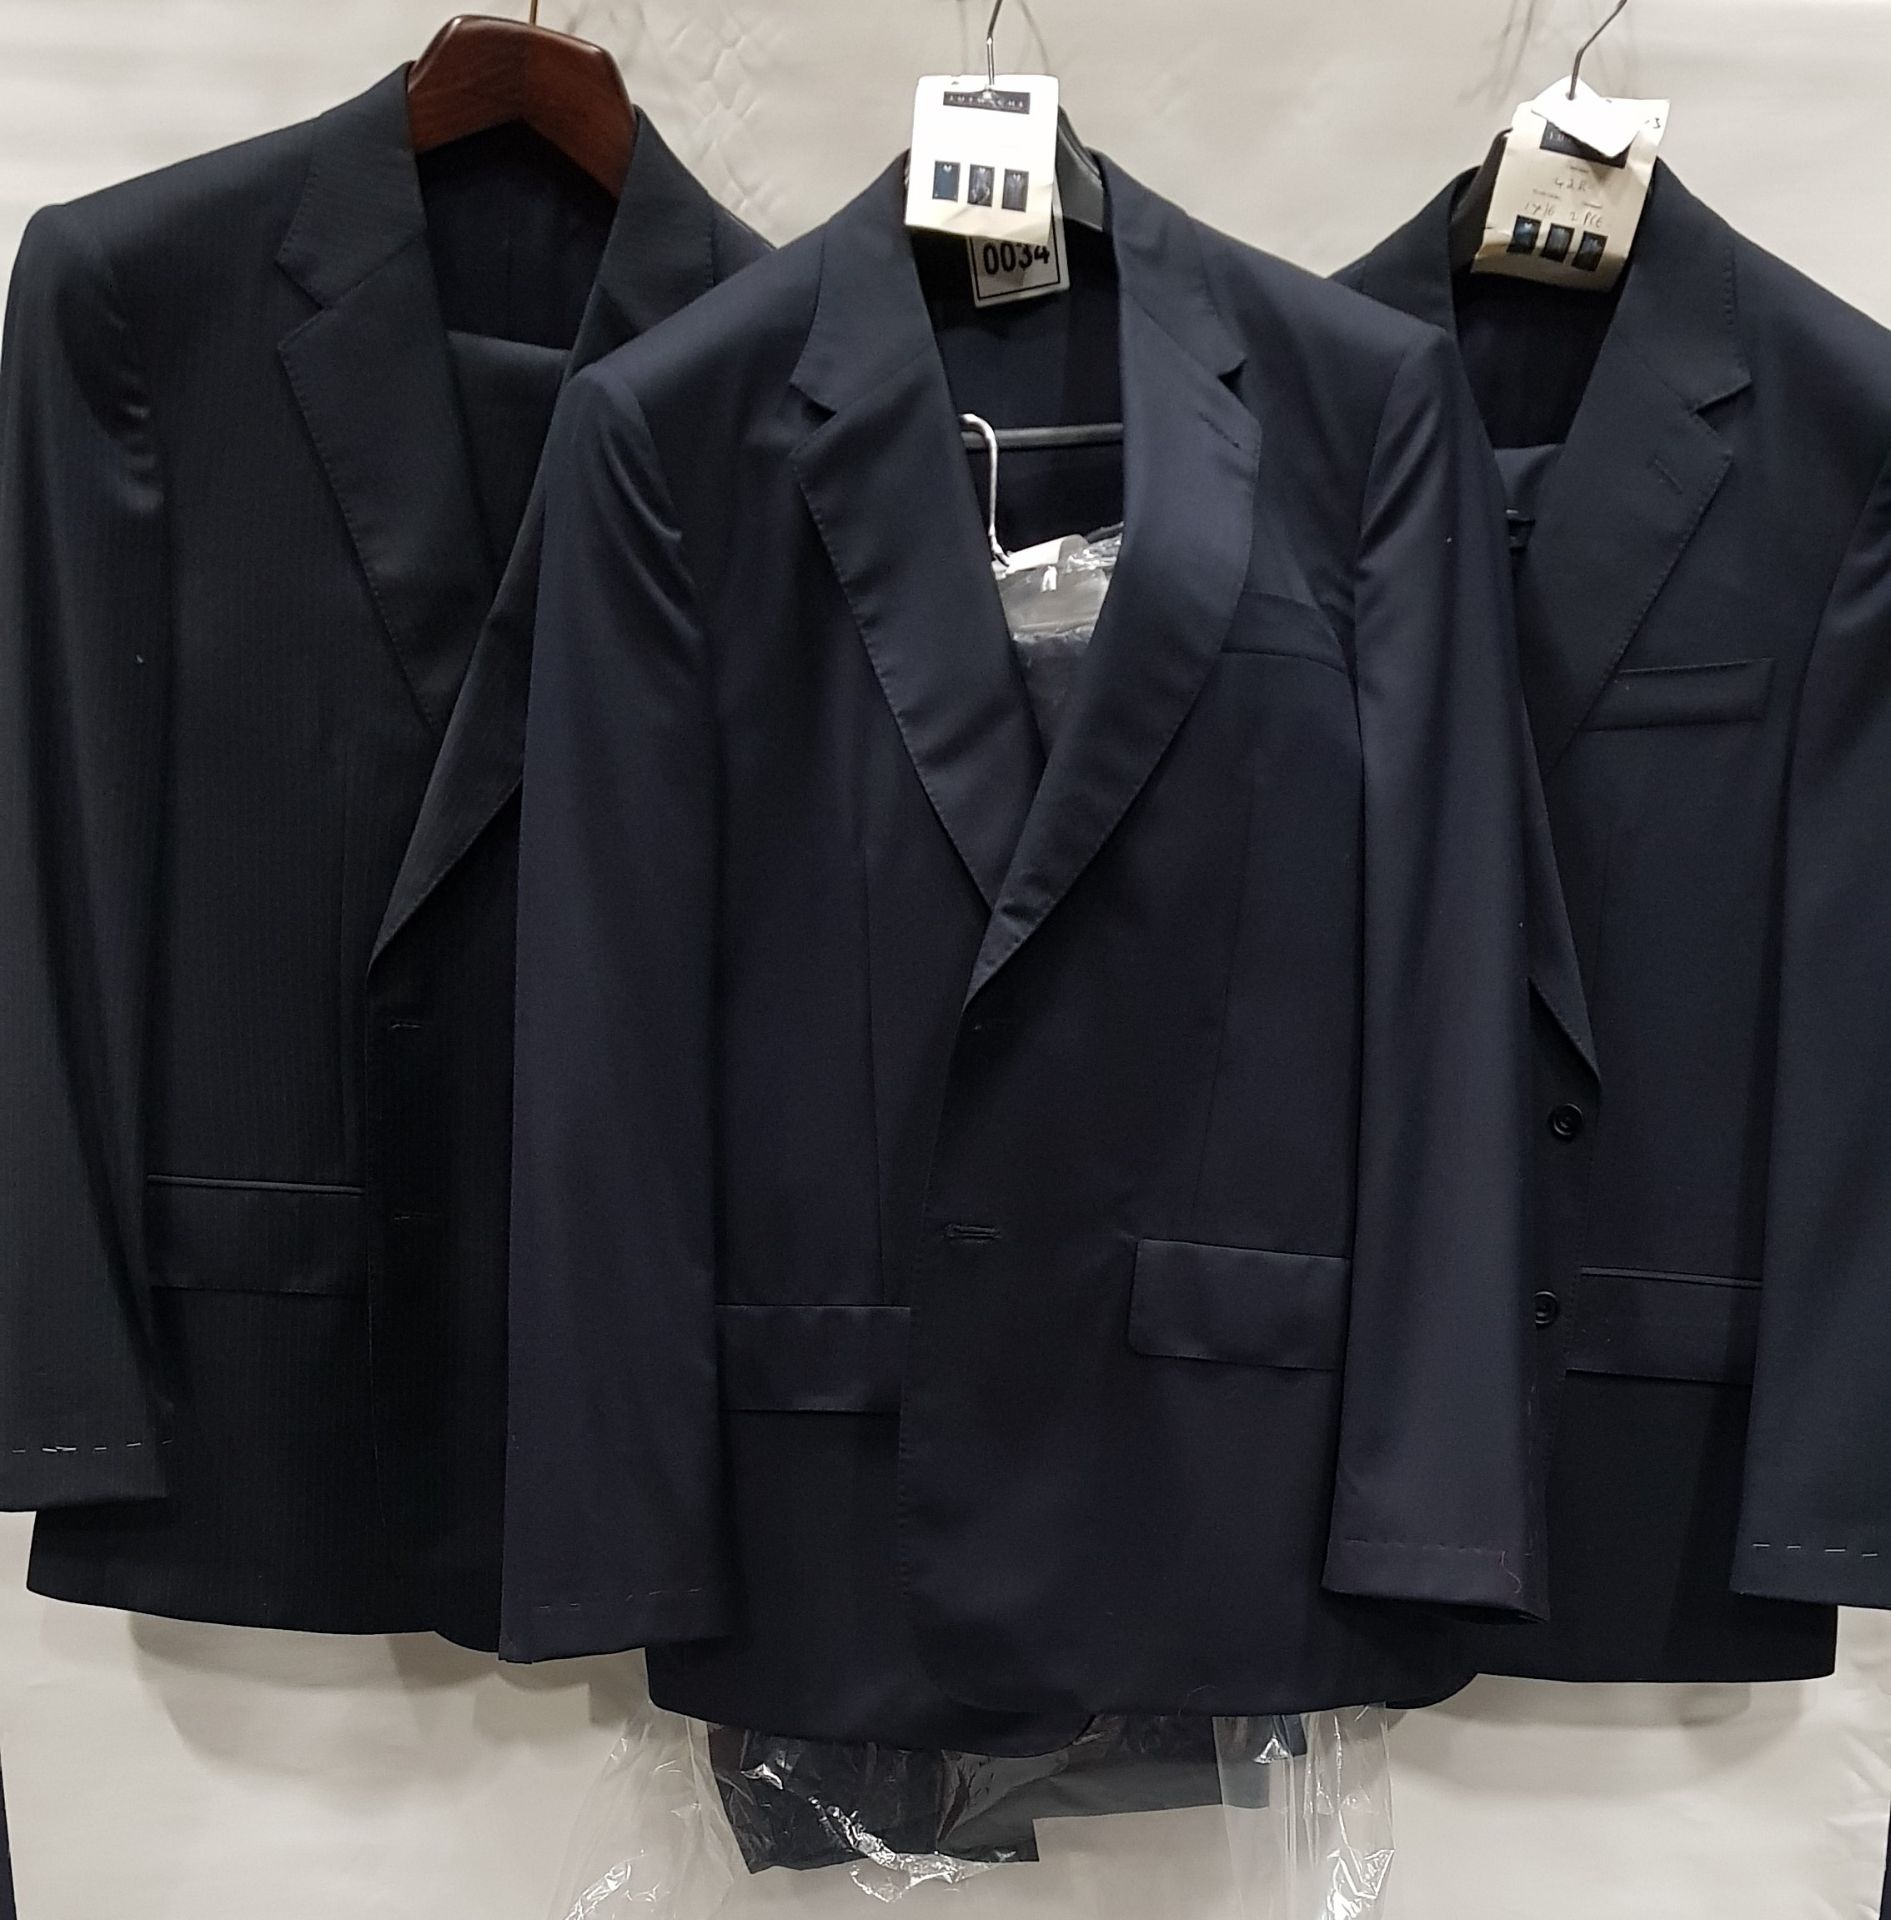 3 X BRAND NEW LUTWYCHE 2 PC DARK BLUE SHADES MATCHING SUITS SIZES 44R, 42R, 42R (NOTE NOT FULLY